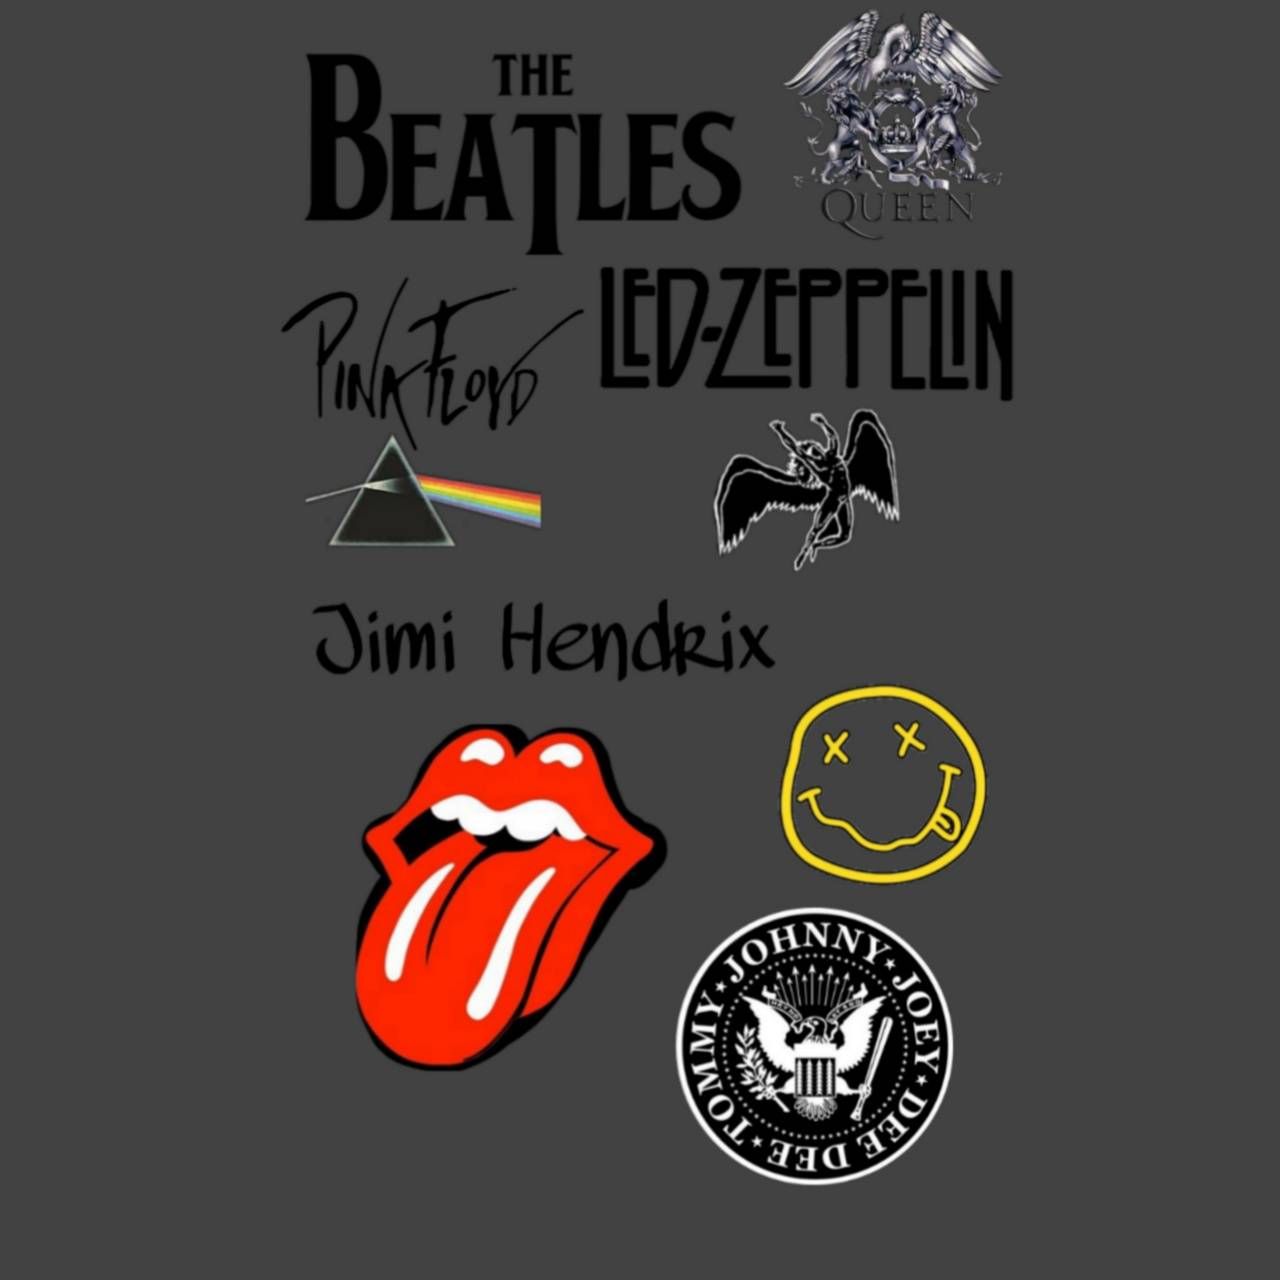 The Beatles, Pink Floyd, Led Zeppelin, Queen, Jimi Hendrix, Nirvana, Smiley face, Johnny Cash, and Eagles logos on a black background - Rolling Stones